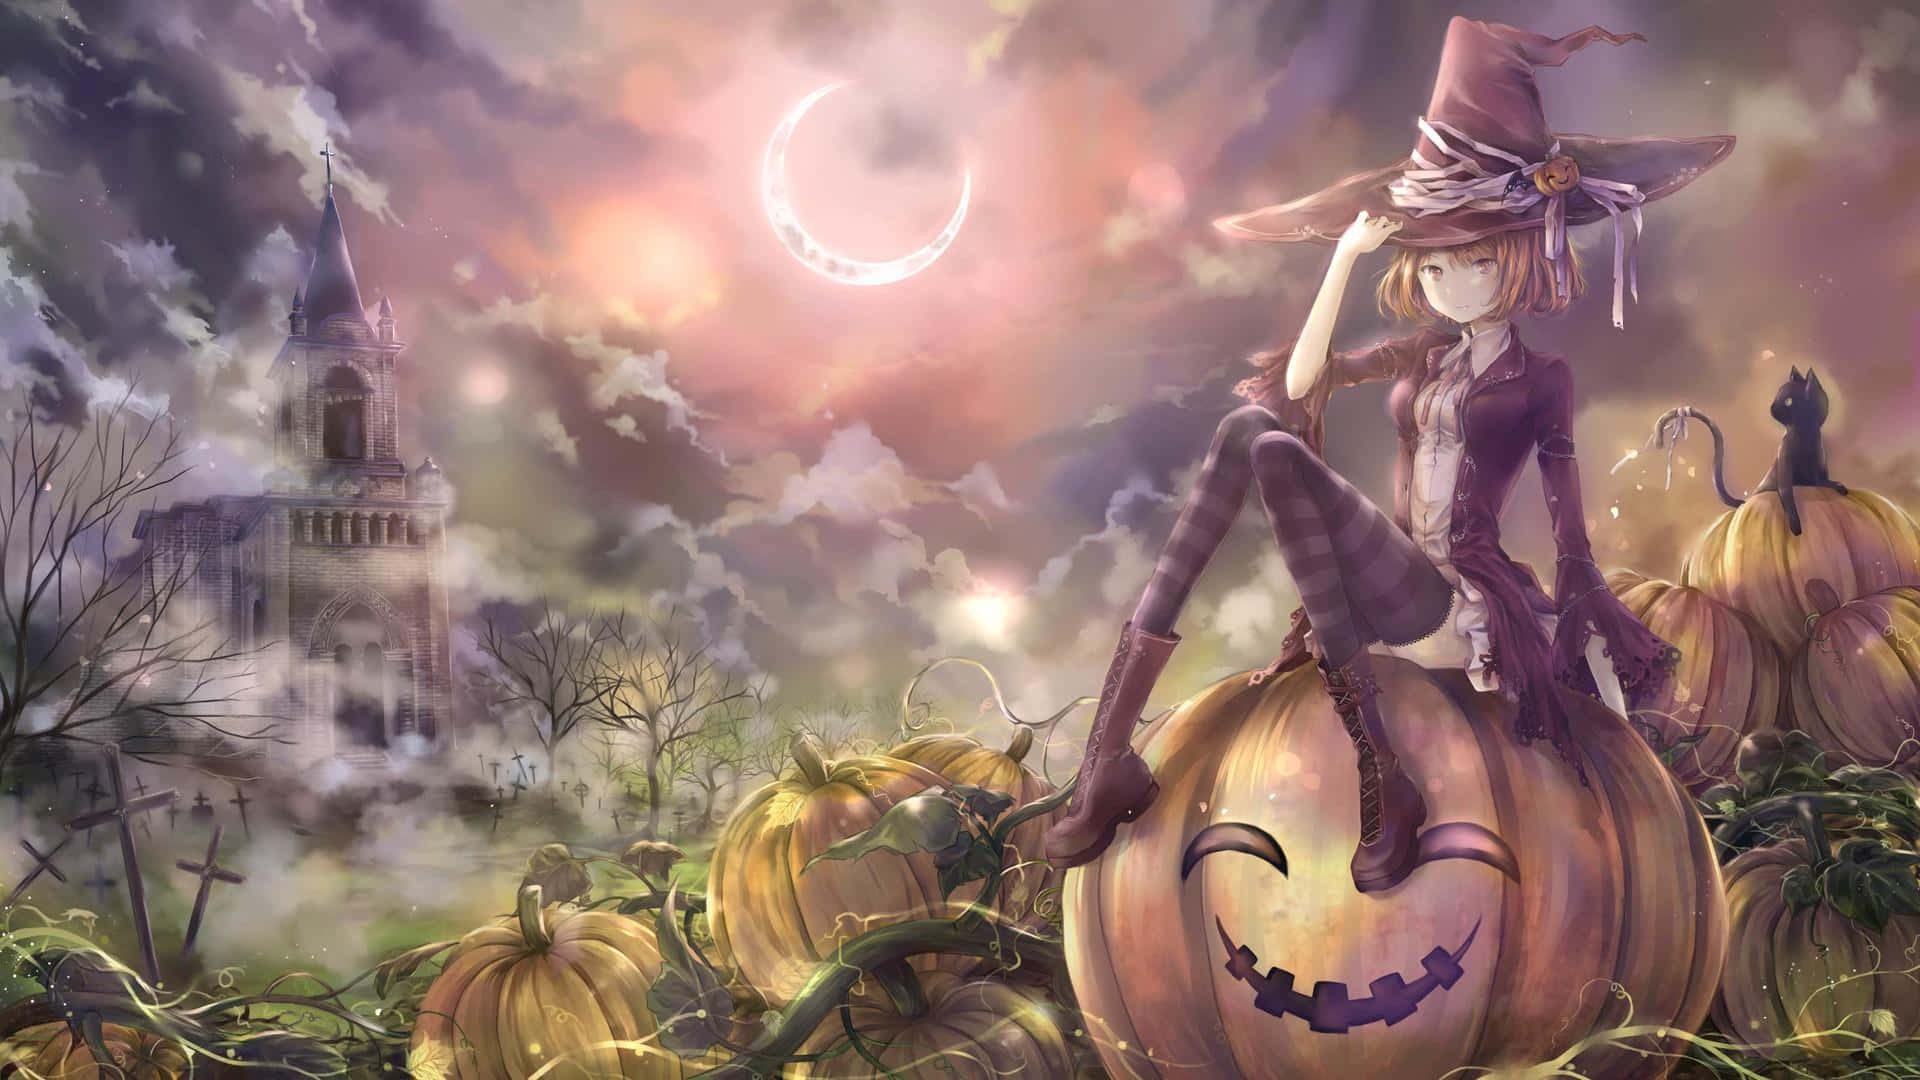 Trick or Treating with an Anime Girl this Halloween Wallpaper